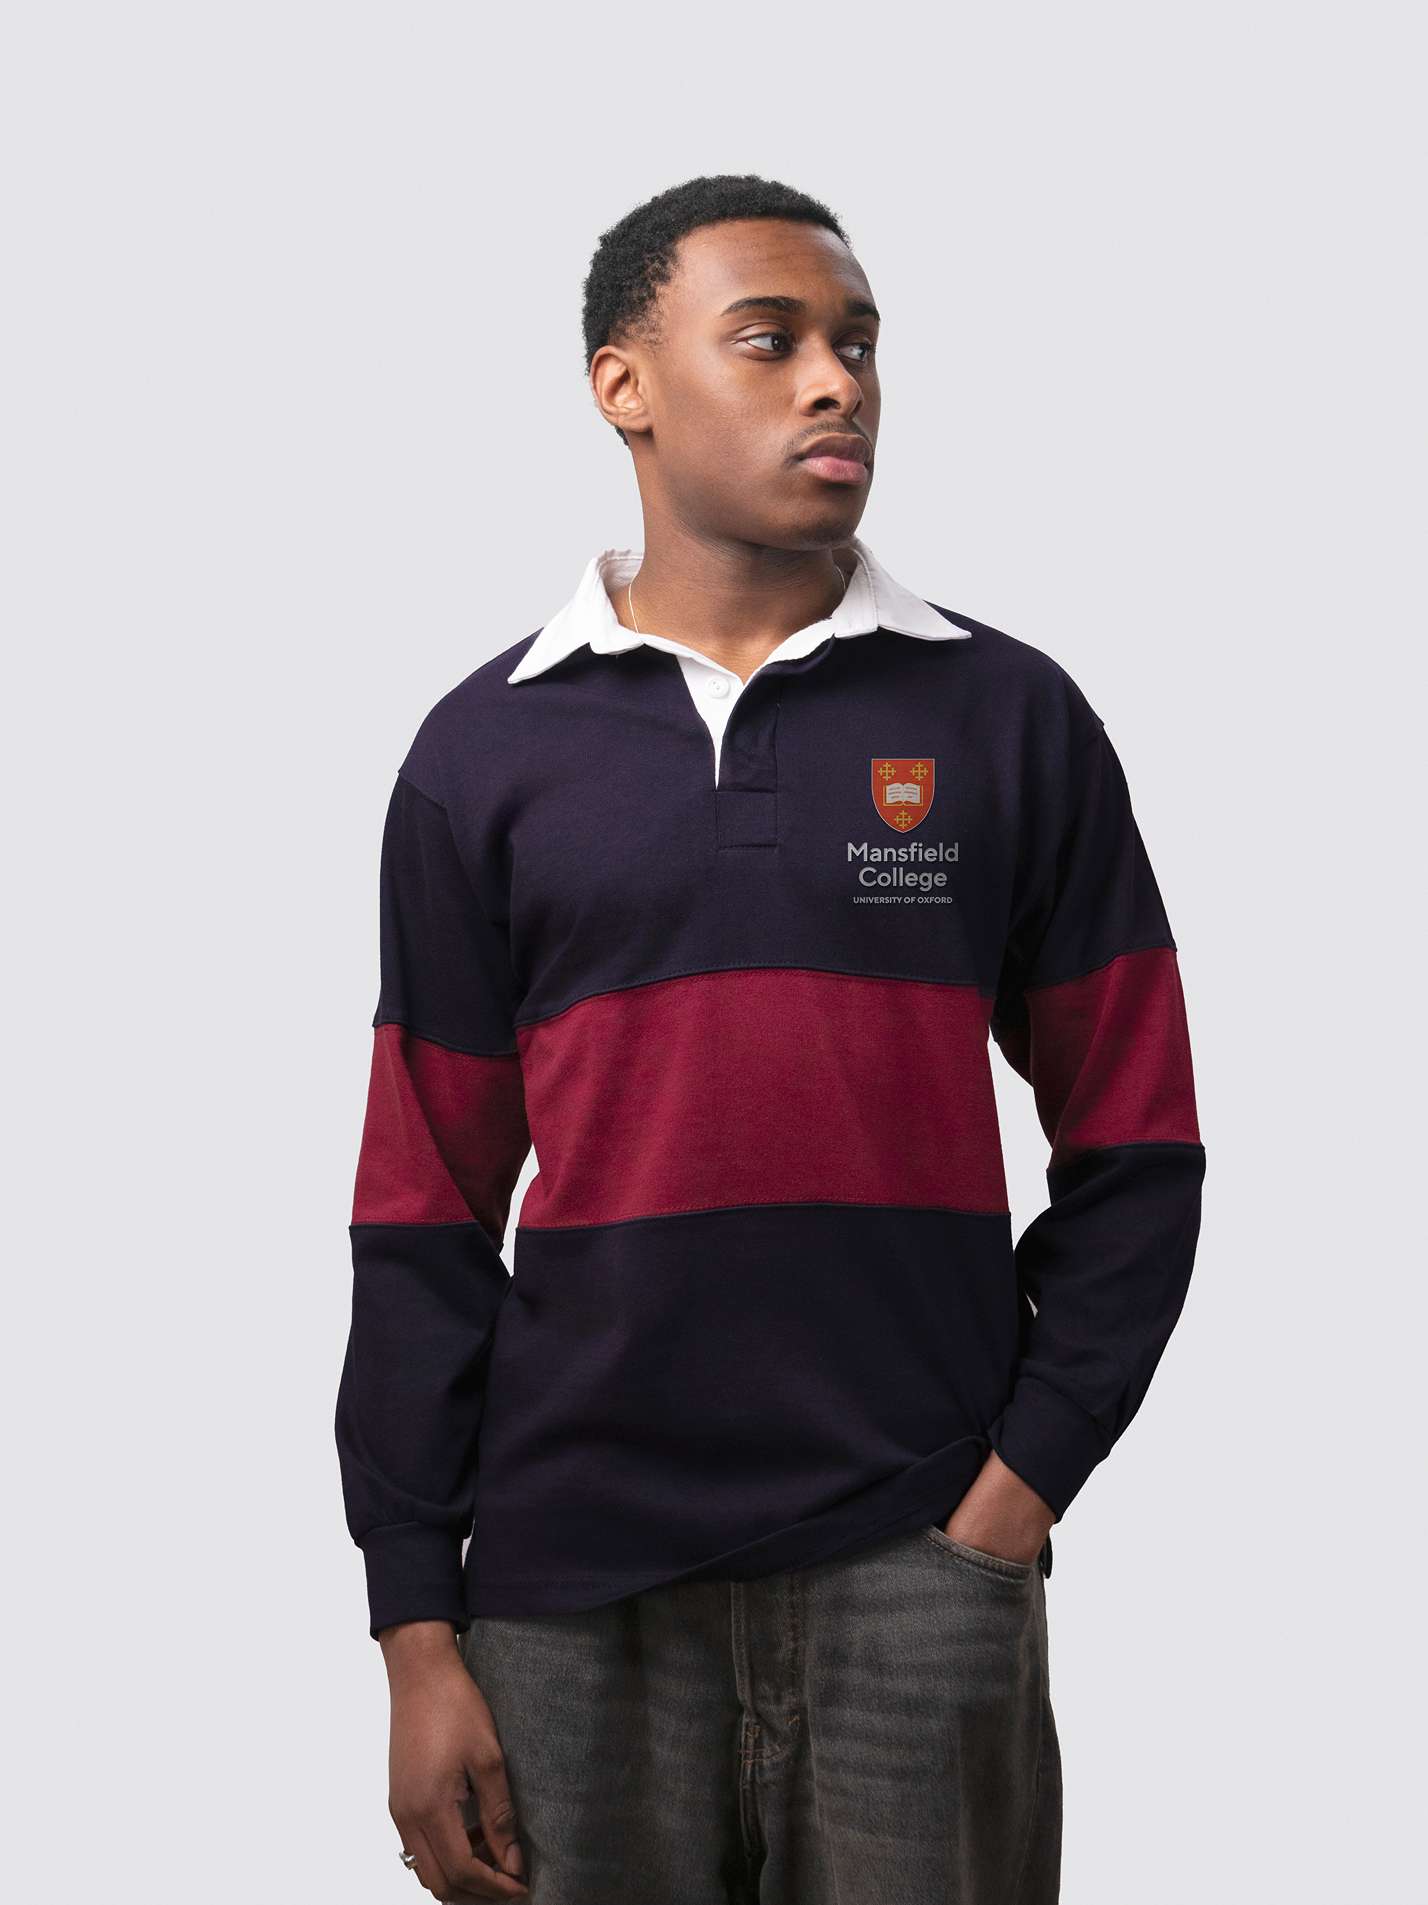 Mansfield College Oxford Unisex Panelled Rugby Shirt